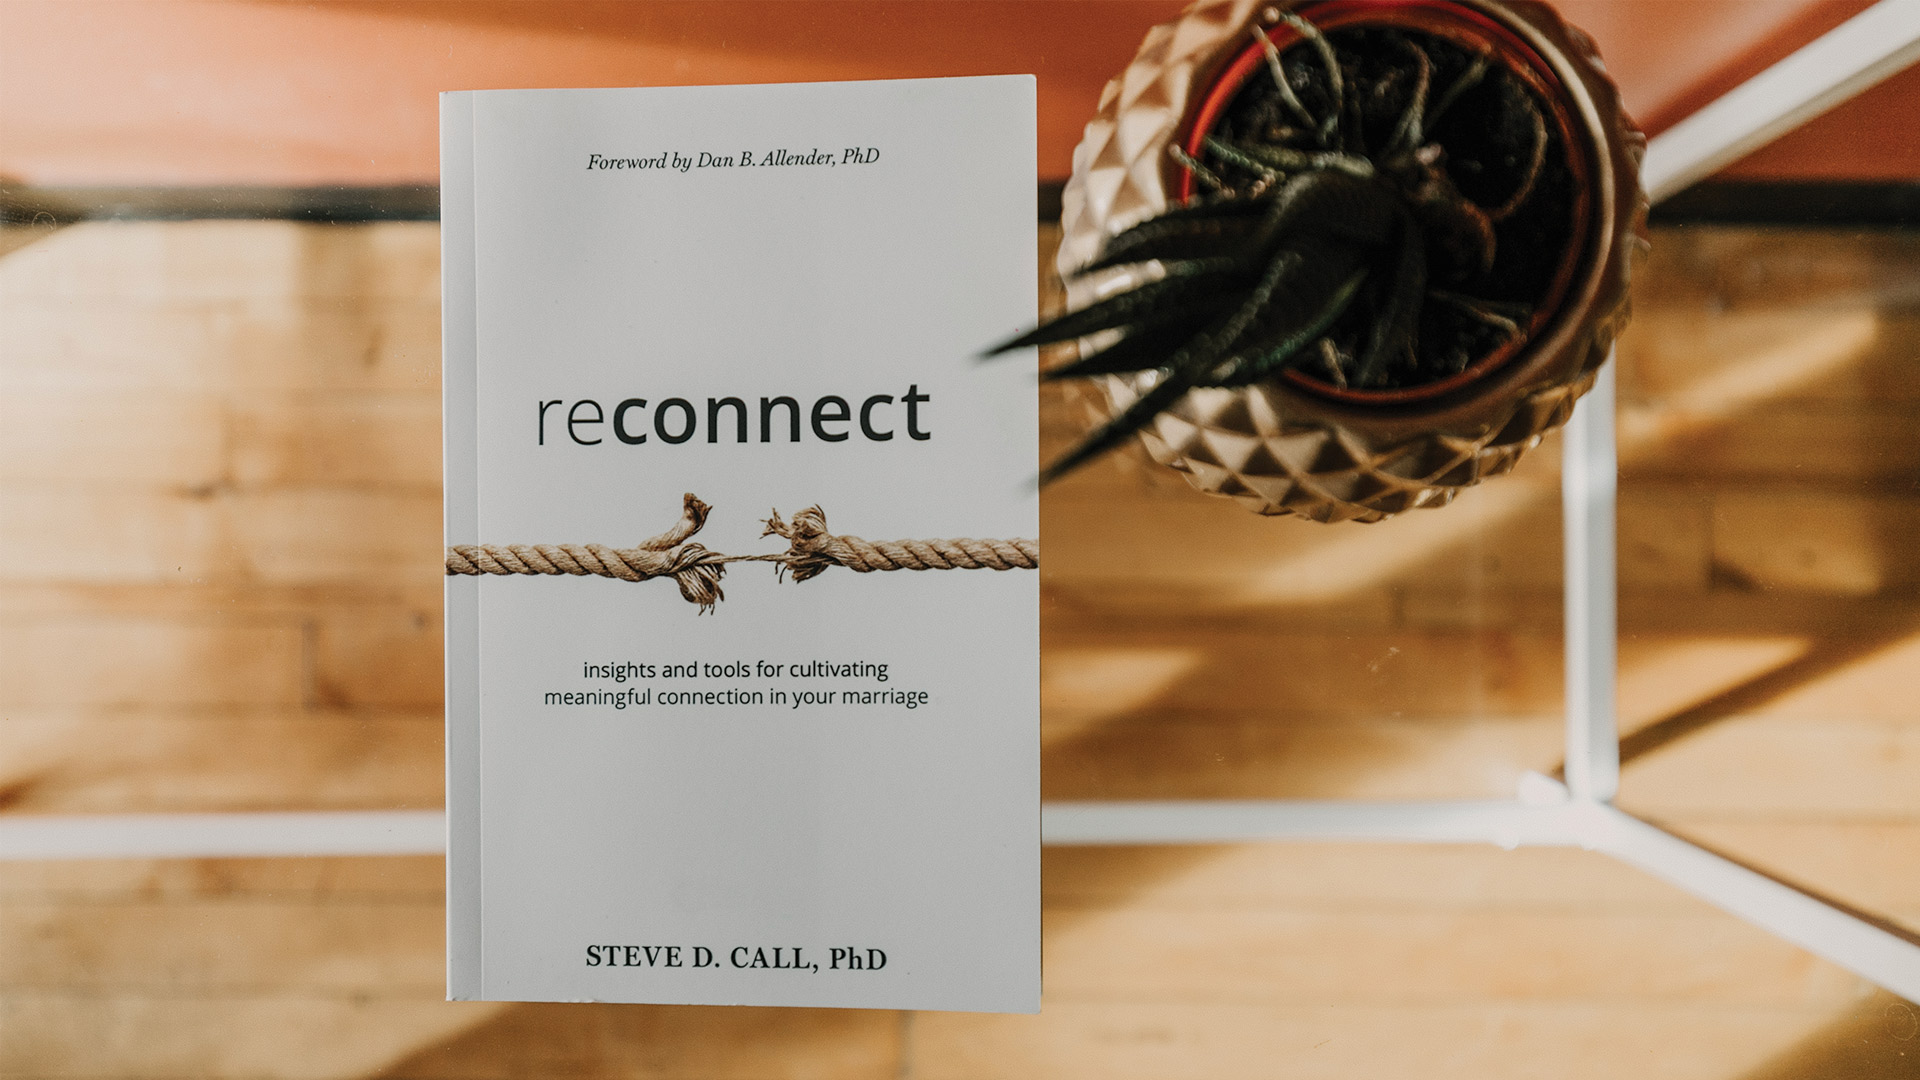 reconnect-book-release-steve-call